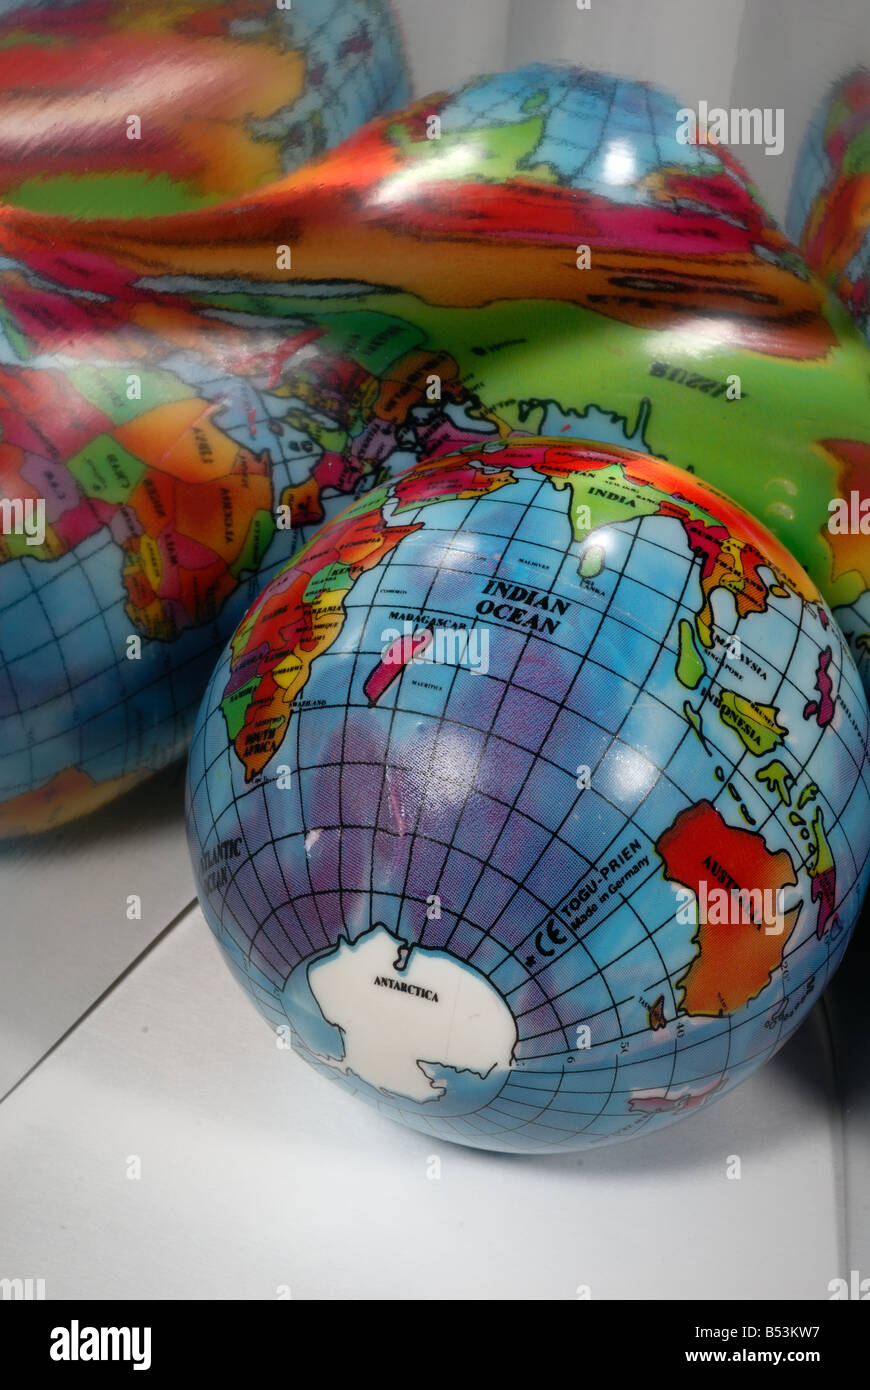 A world globe is reflected on a shiny surface Stock Photo